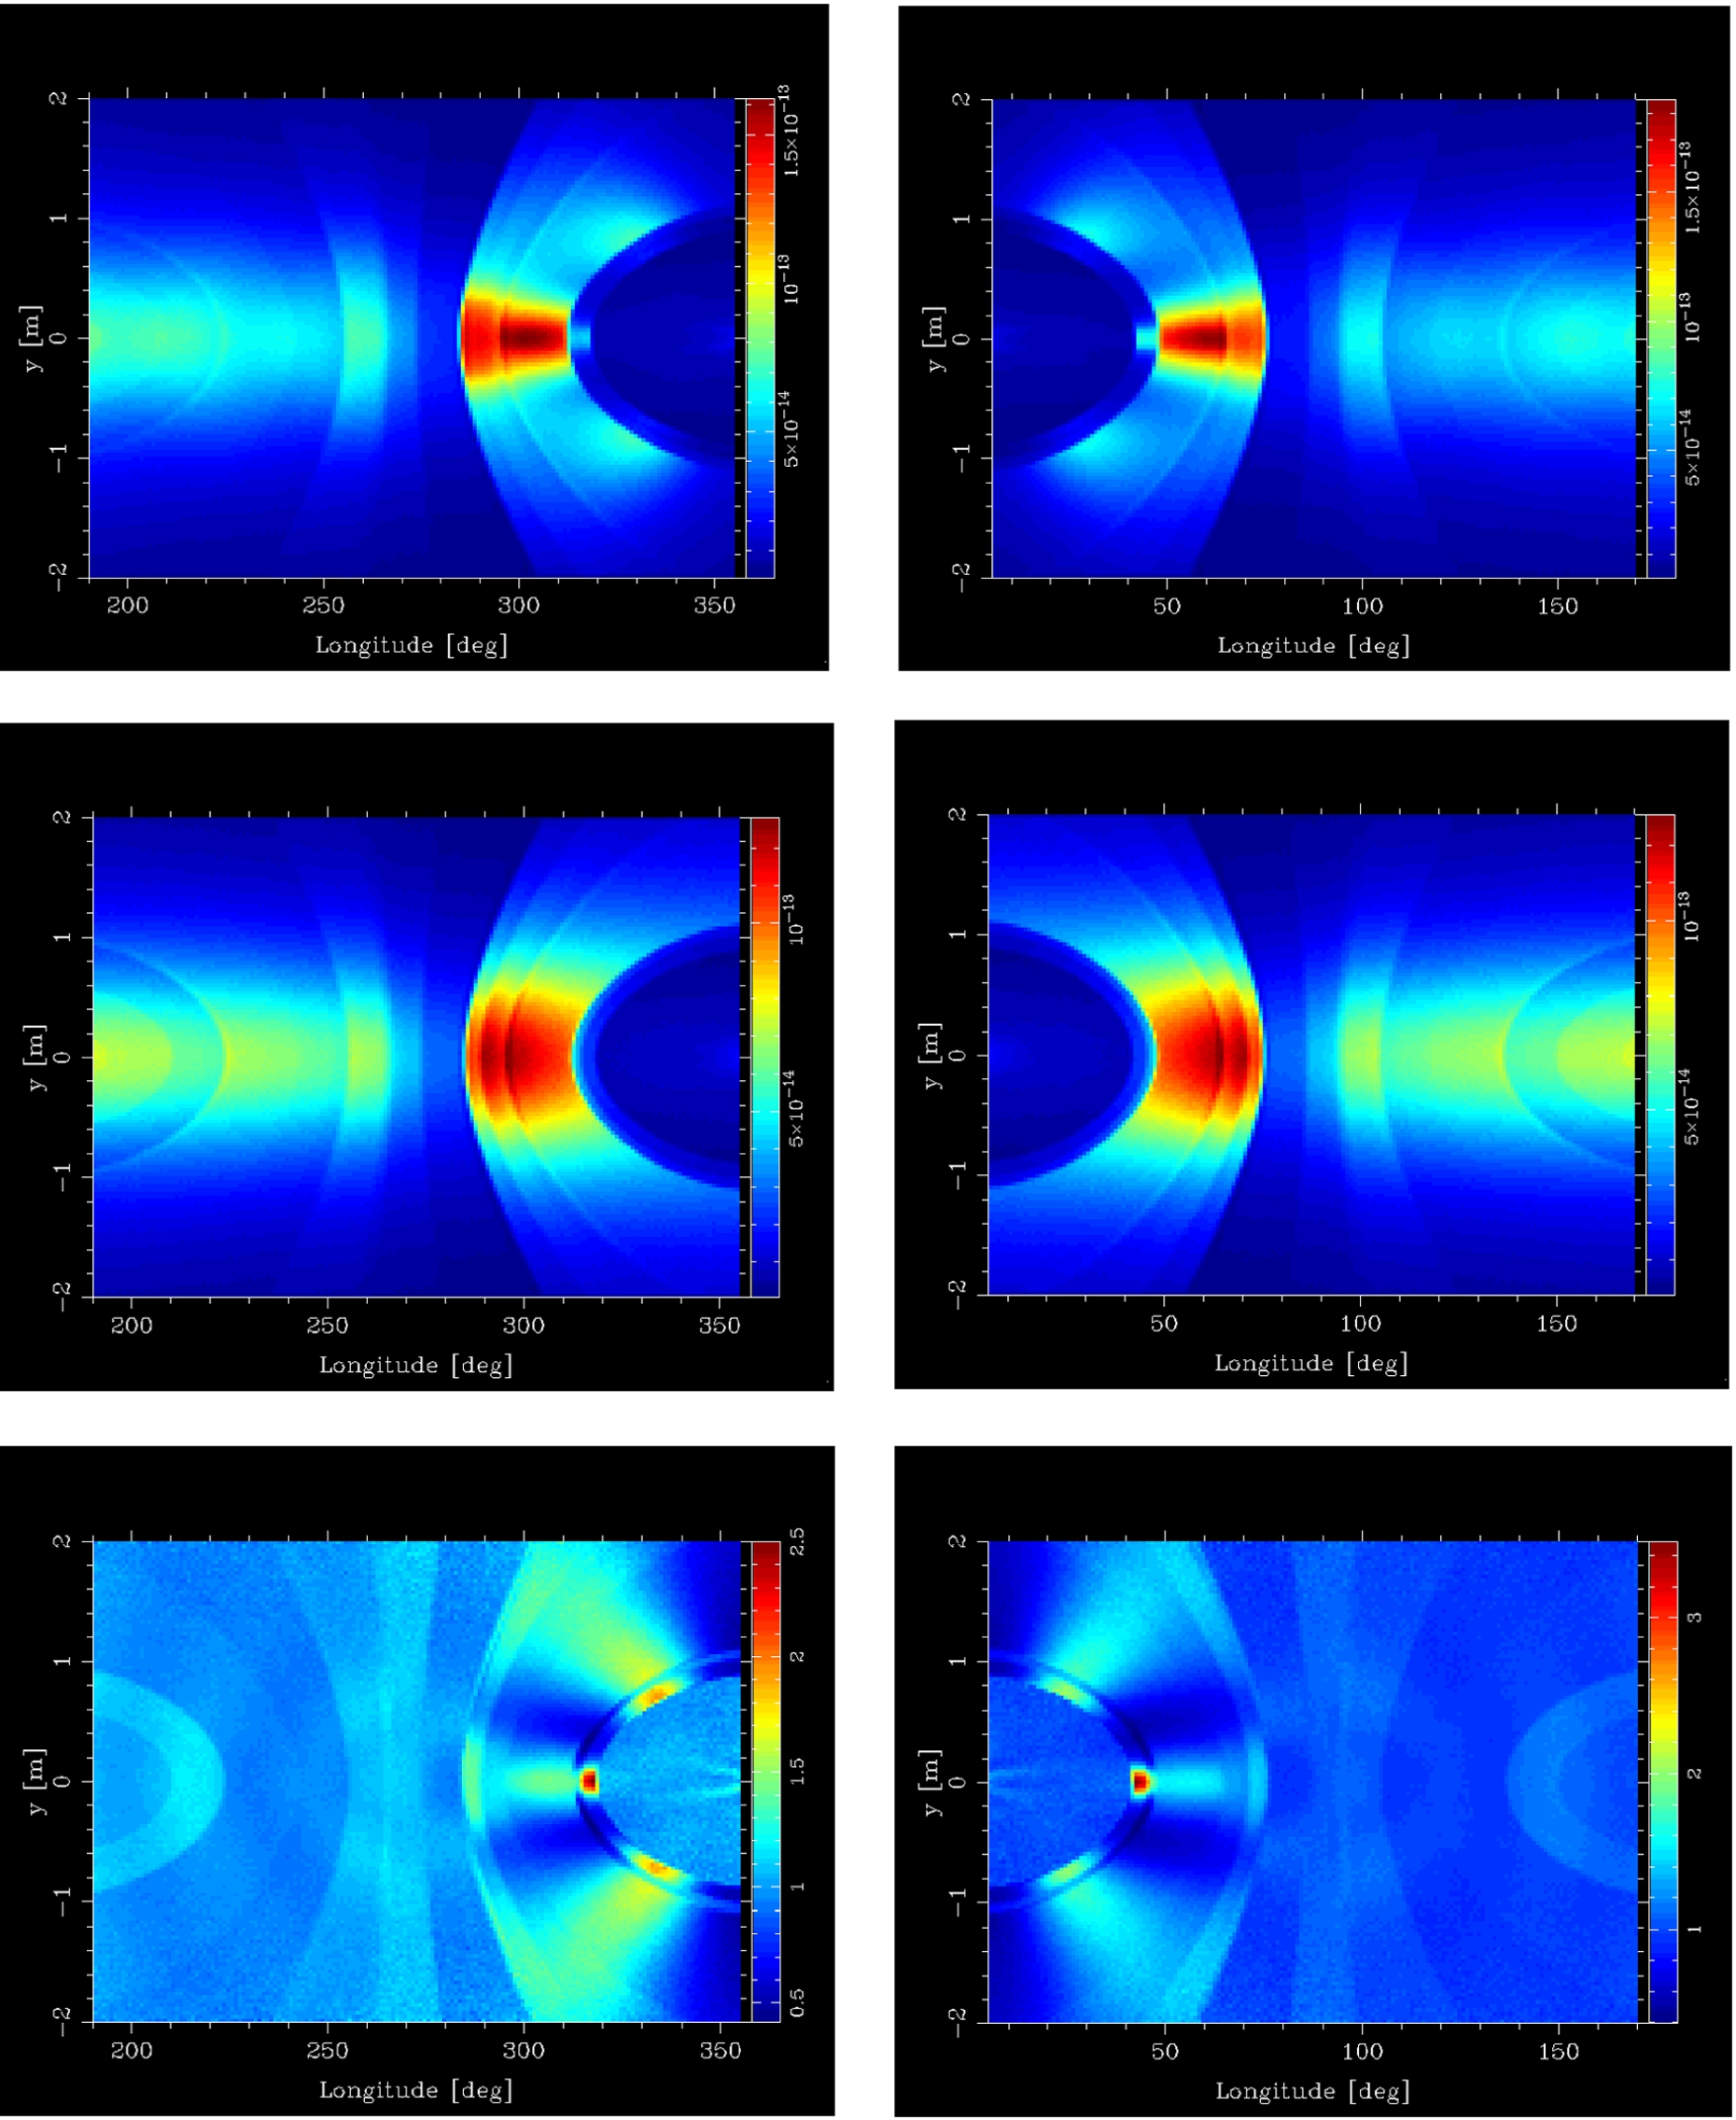 Simulation of the background generated by a hollow cylinder of Zr2.5%Nb with the texture reported in reference [9] (top panels) and with a uniform distribution of grain orientations (middle panels). In the bottom panels, the ratio between the results of the top and middle panels is shown.